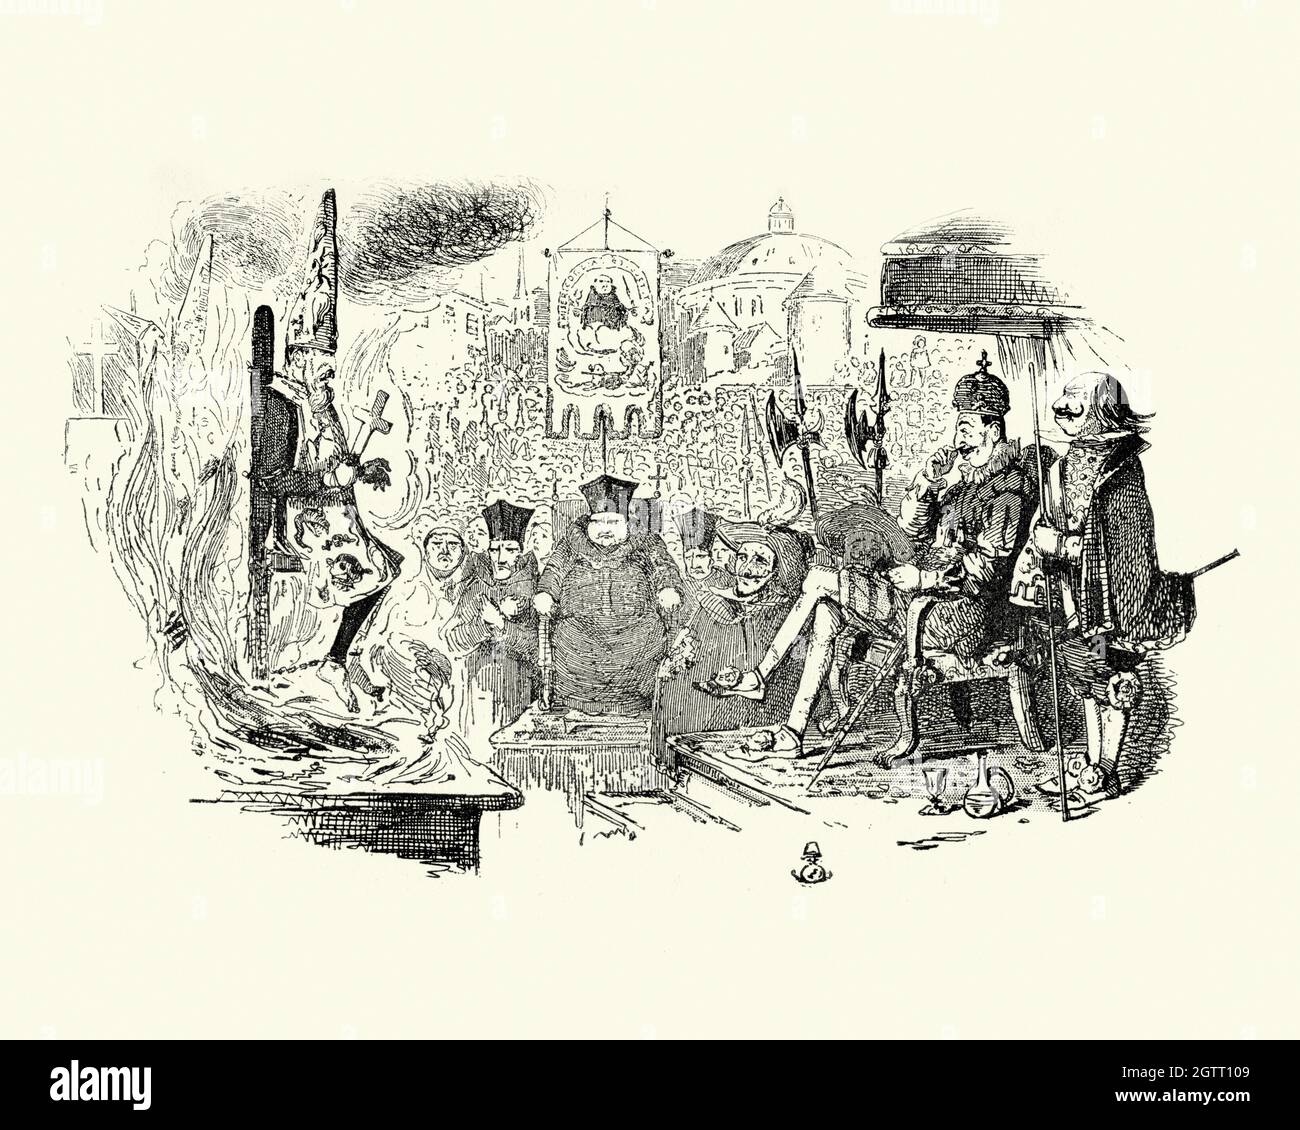 Vintage illustration Spanish Inquisition, heretic burned at the stake, Auto Da Fe a scene from the Ingoldsby Legends Stock Photo